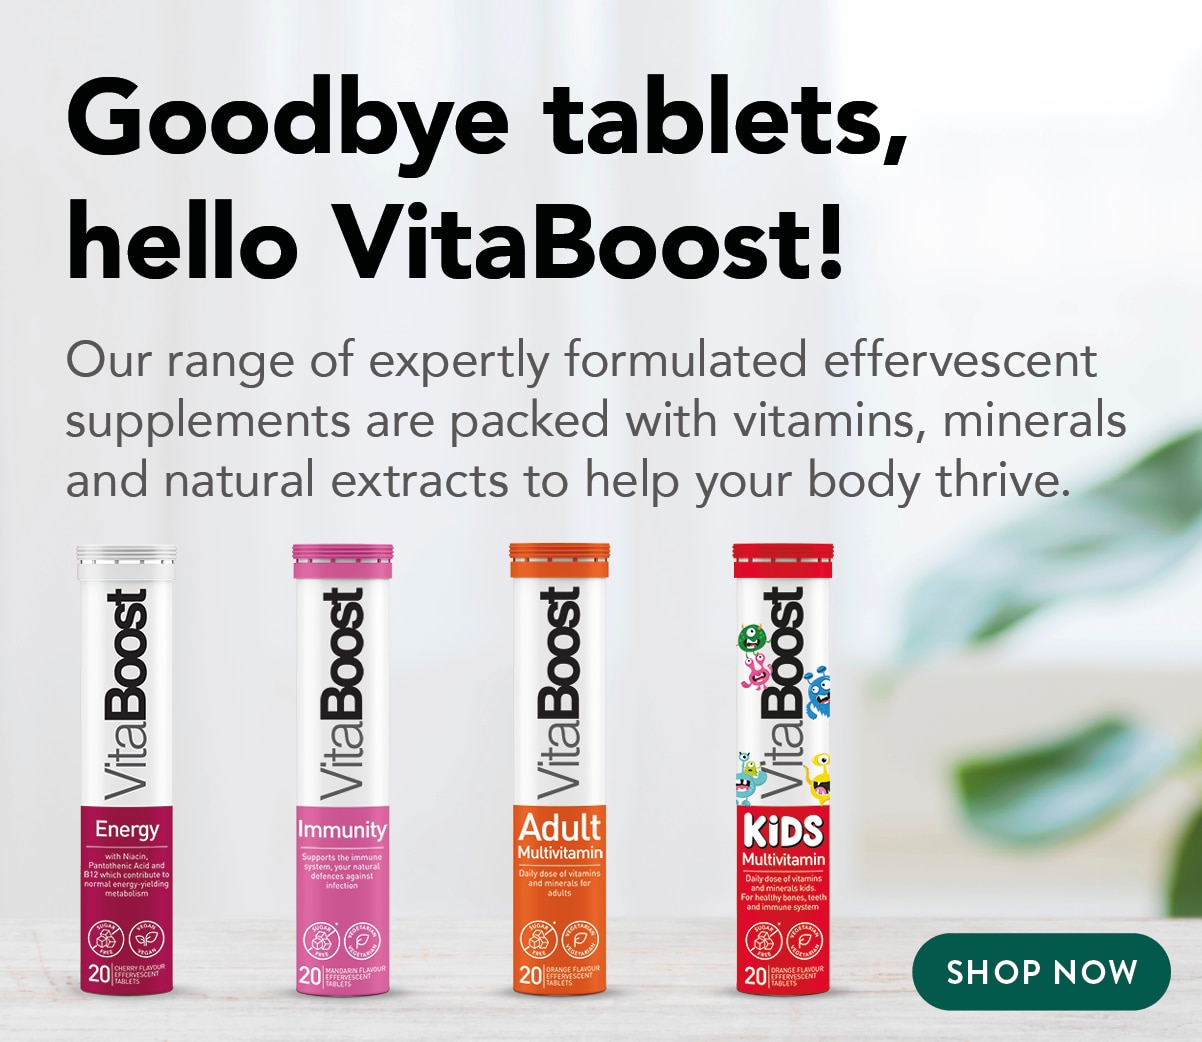 VitaBoost vitamin, mineral and natural extract supplements